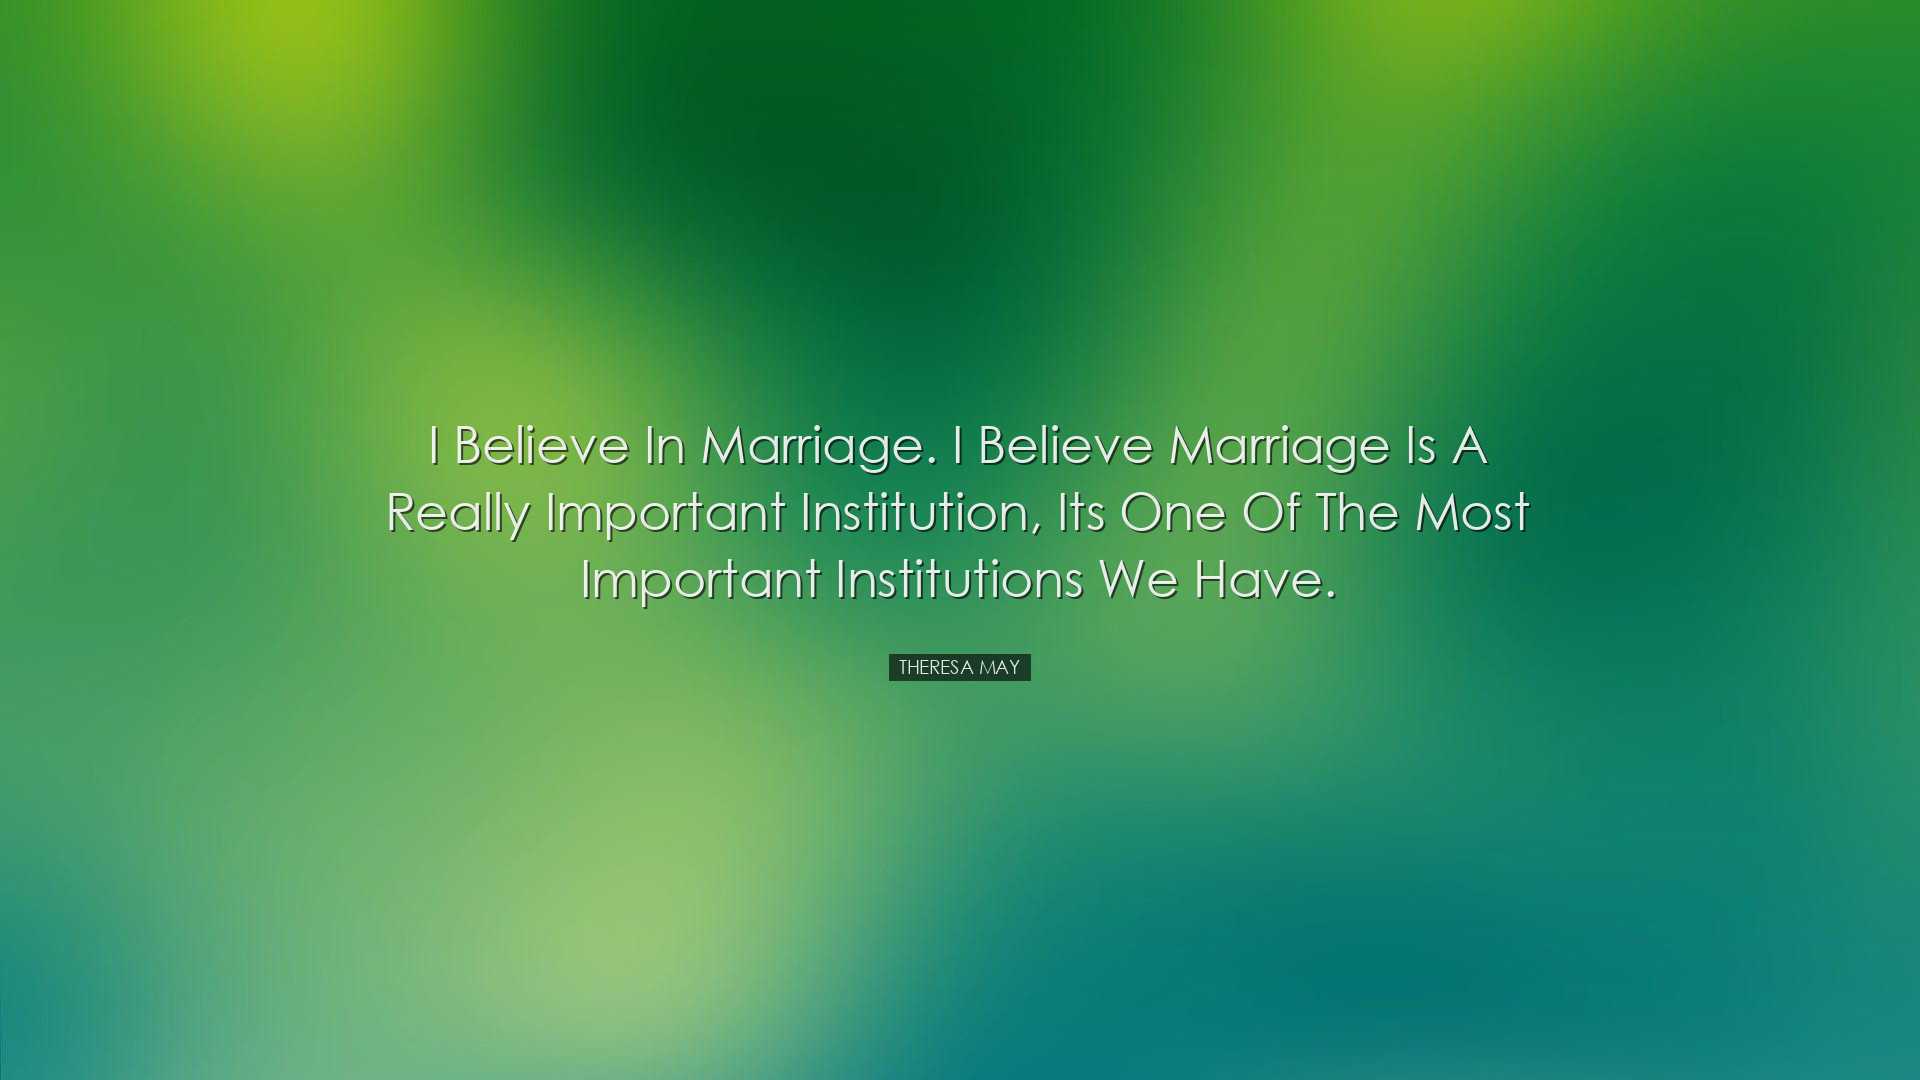 I believe in marriage. I believe marriage is a really important in